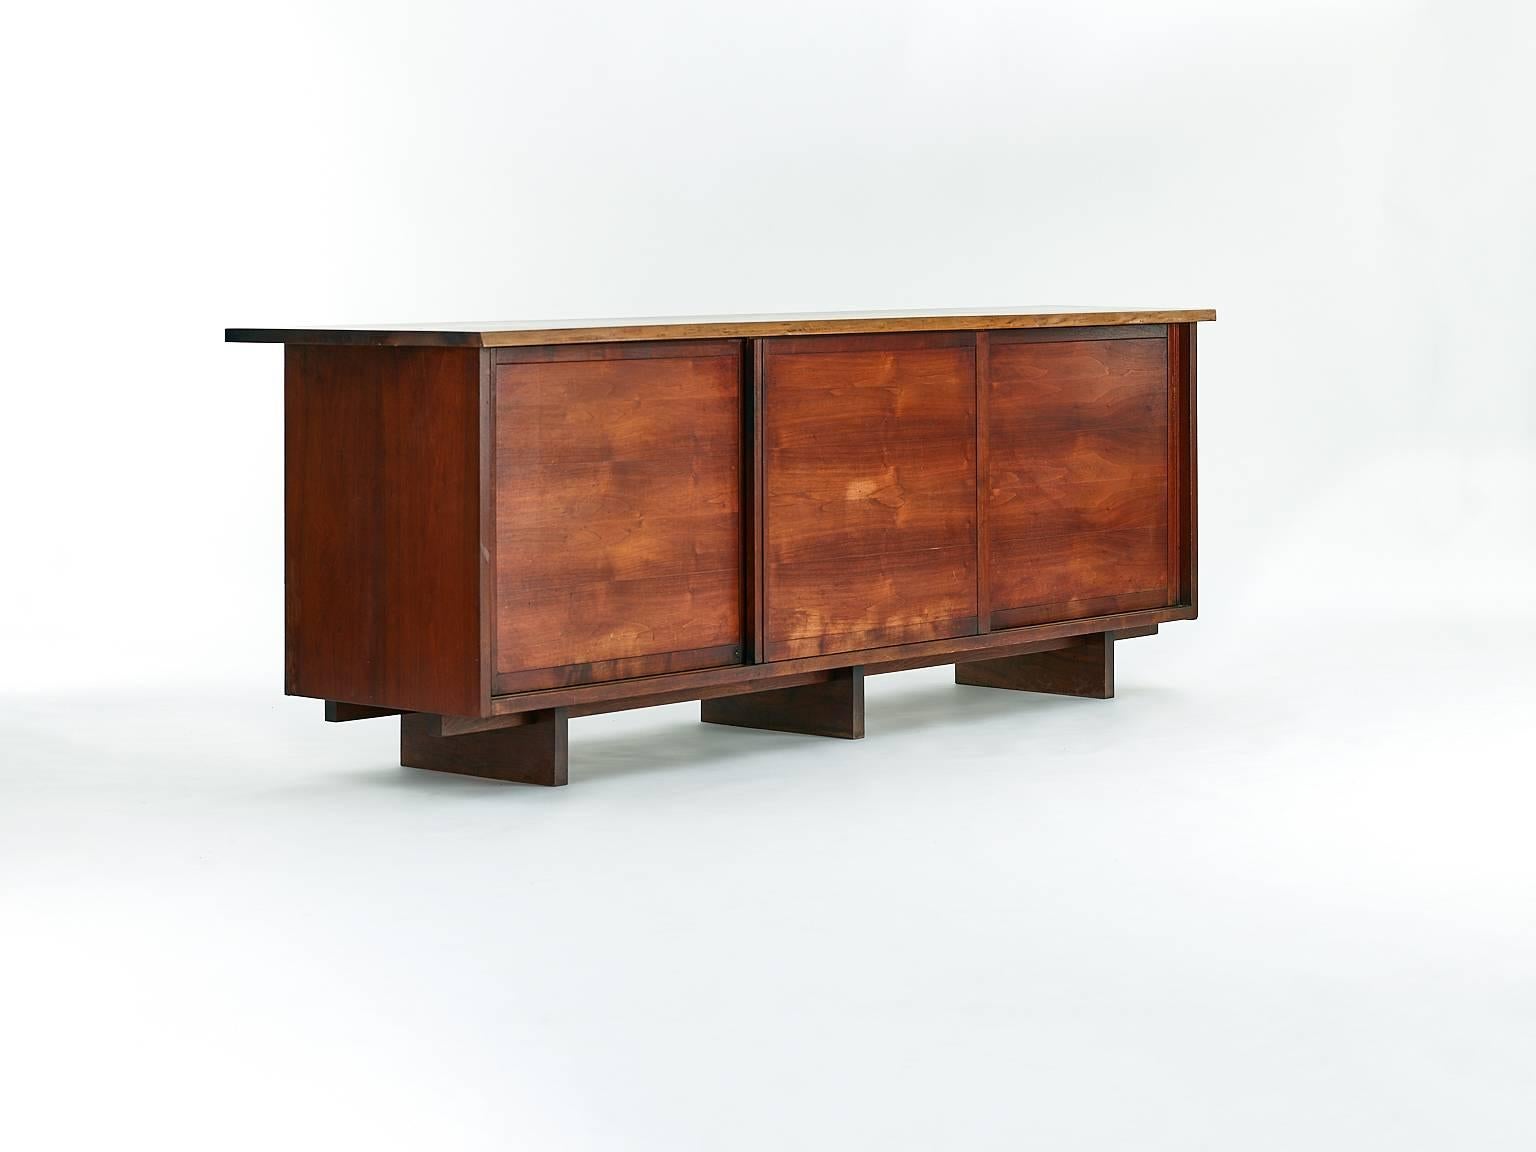 Cabinet by George Nakashima with three sliding doors.

USA, circa 1957.

American black walnut.

Dimention: 95 W x 22 D x 33 H in.

Single-slab top with one free edge.
Three sliding doors concealing four adjustable shelves and four